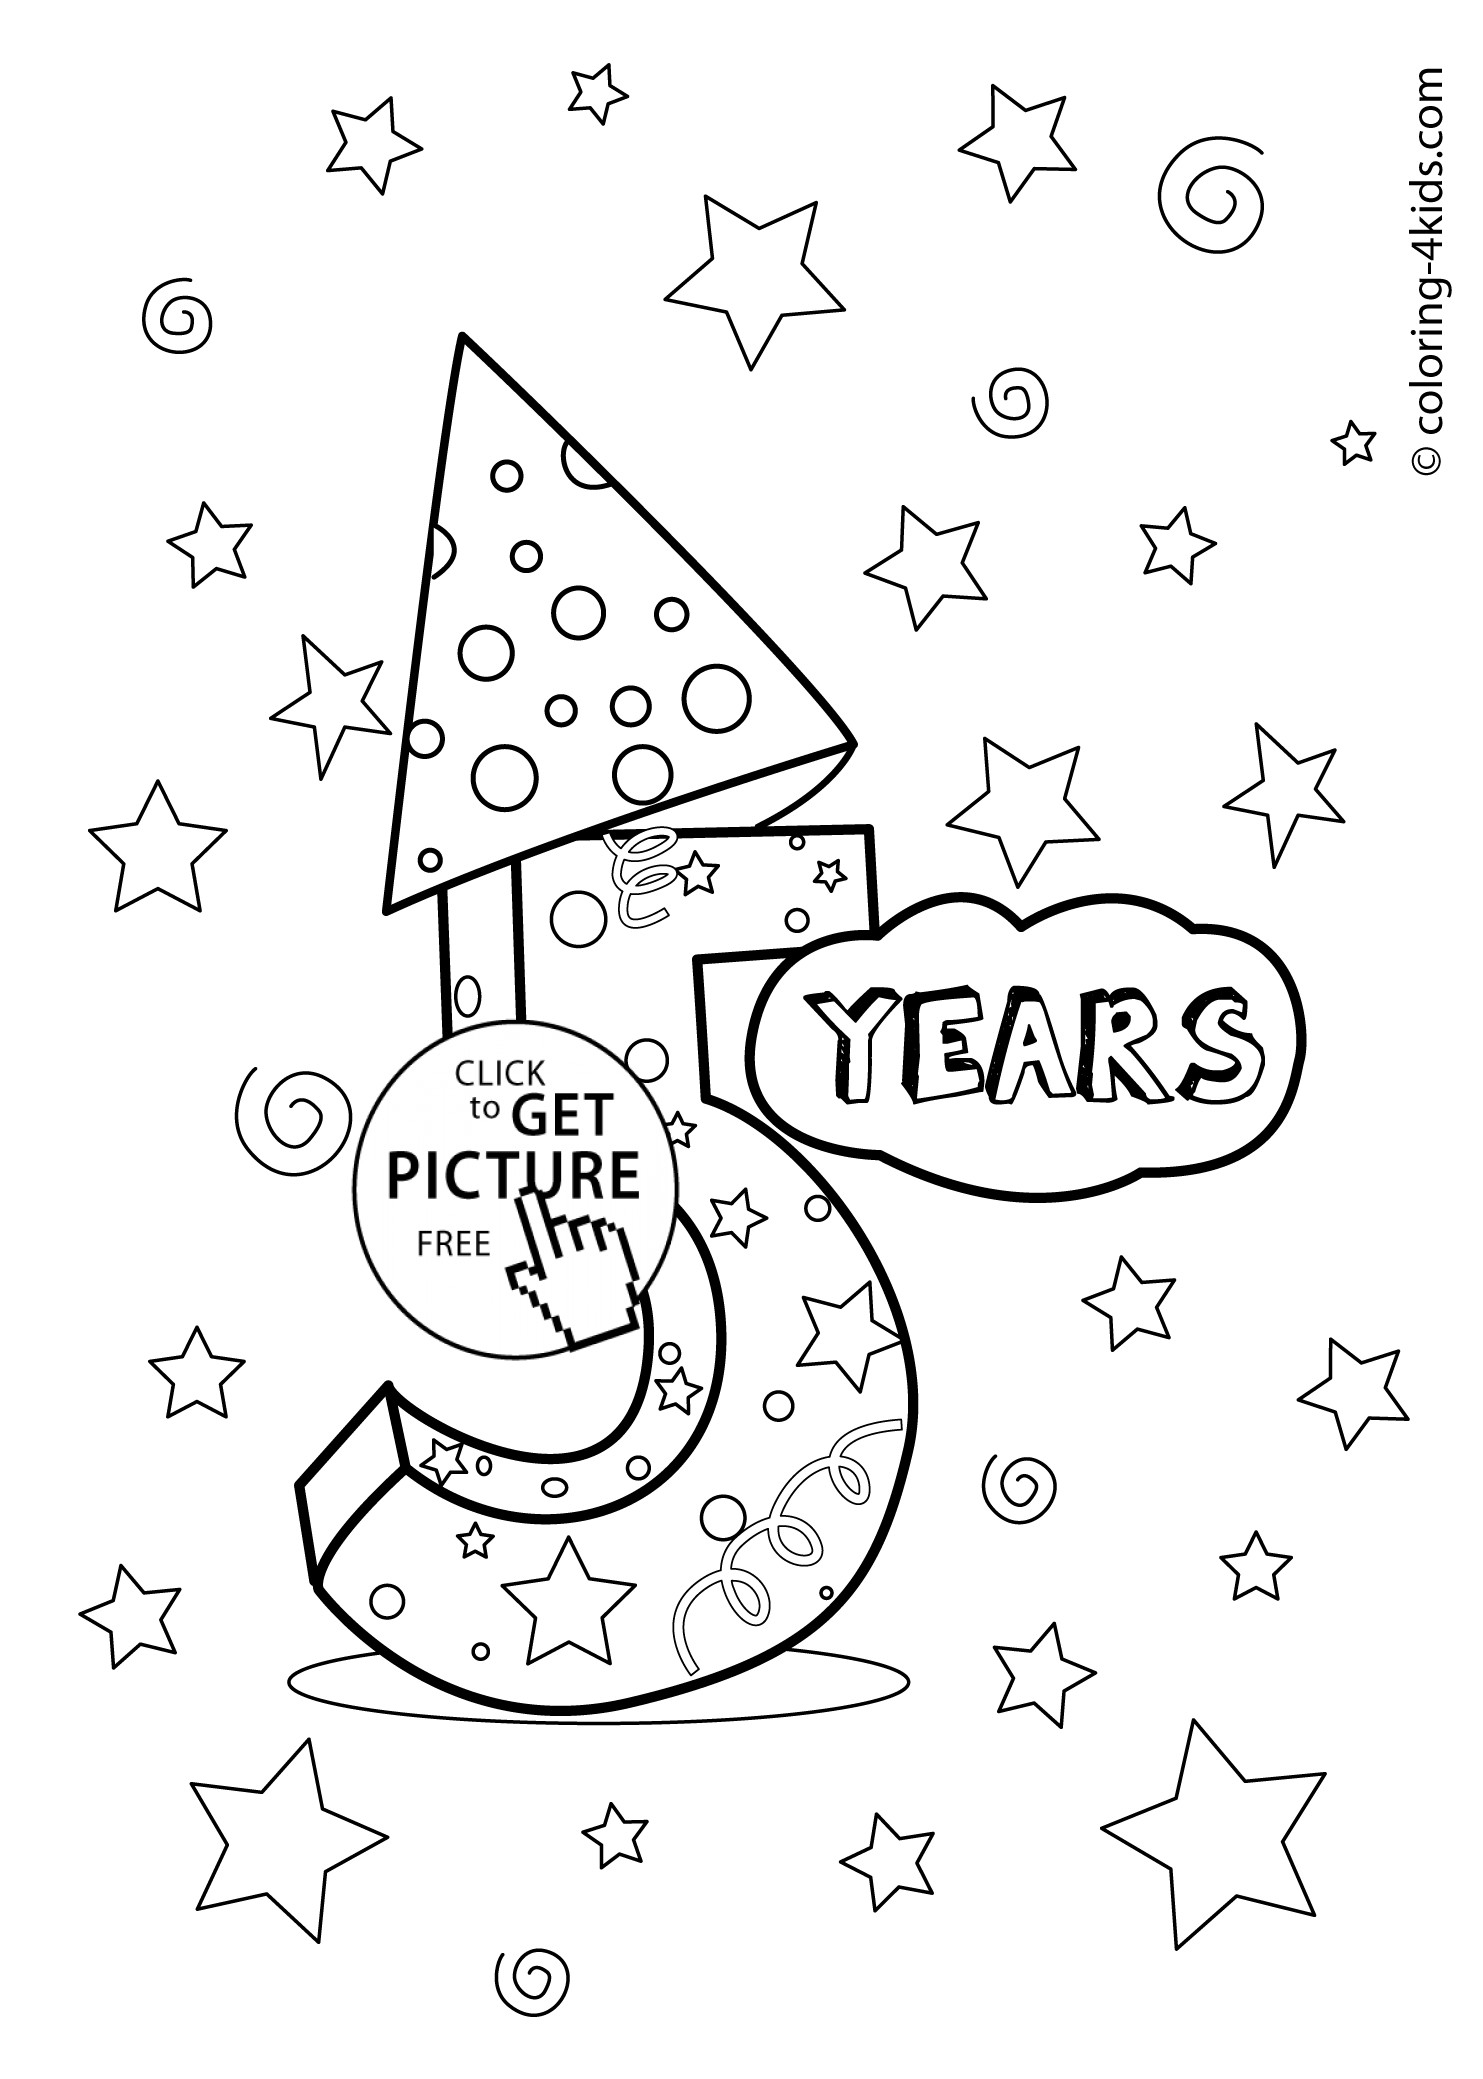 Coloring Sheets For Girls Birthday 10
 5 years birthday coloring pages for kids printables